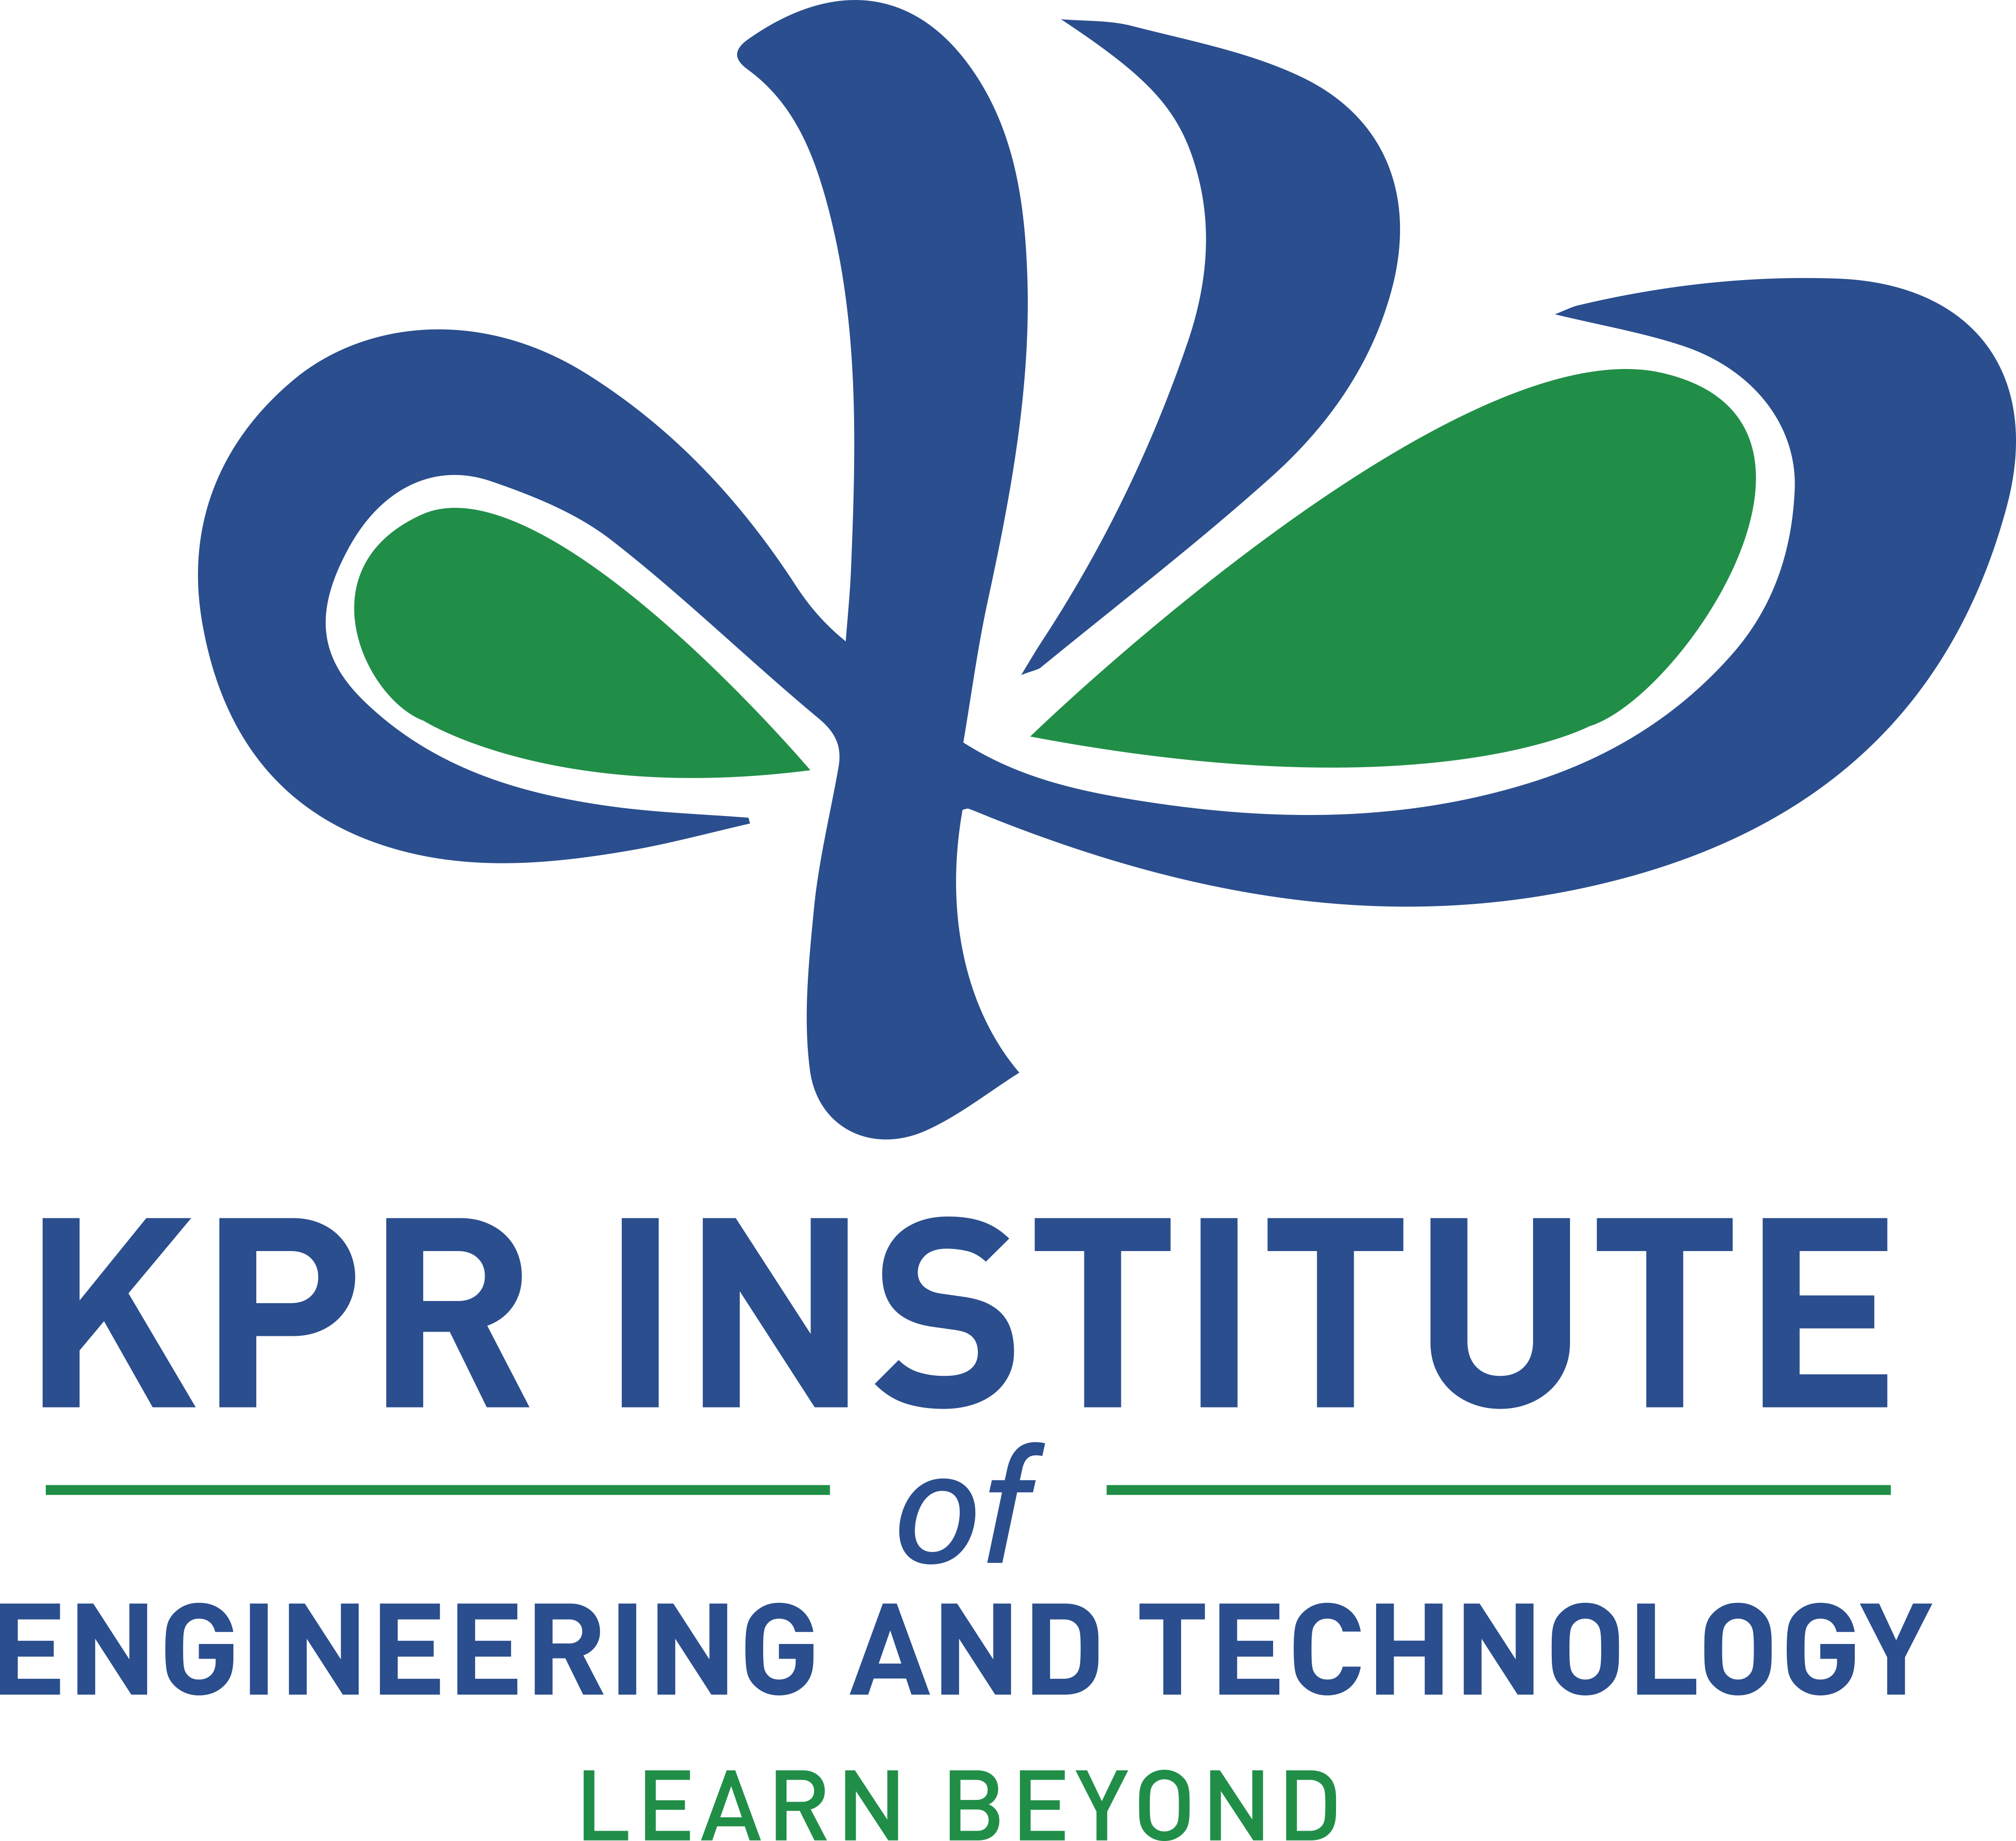 KPR INSTITUTE OF ENGINEERING AND TECHNOLOGY